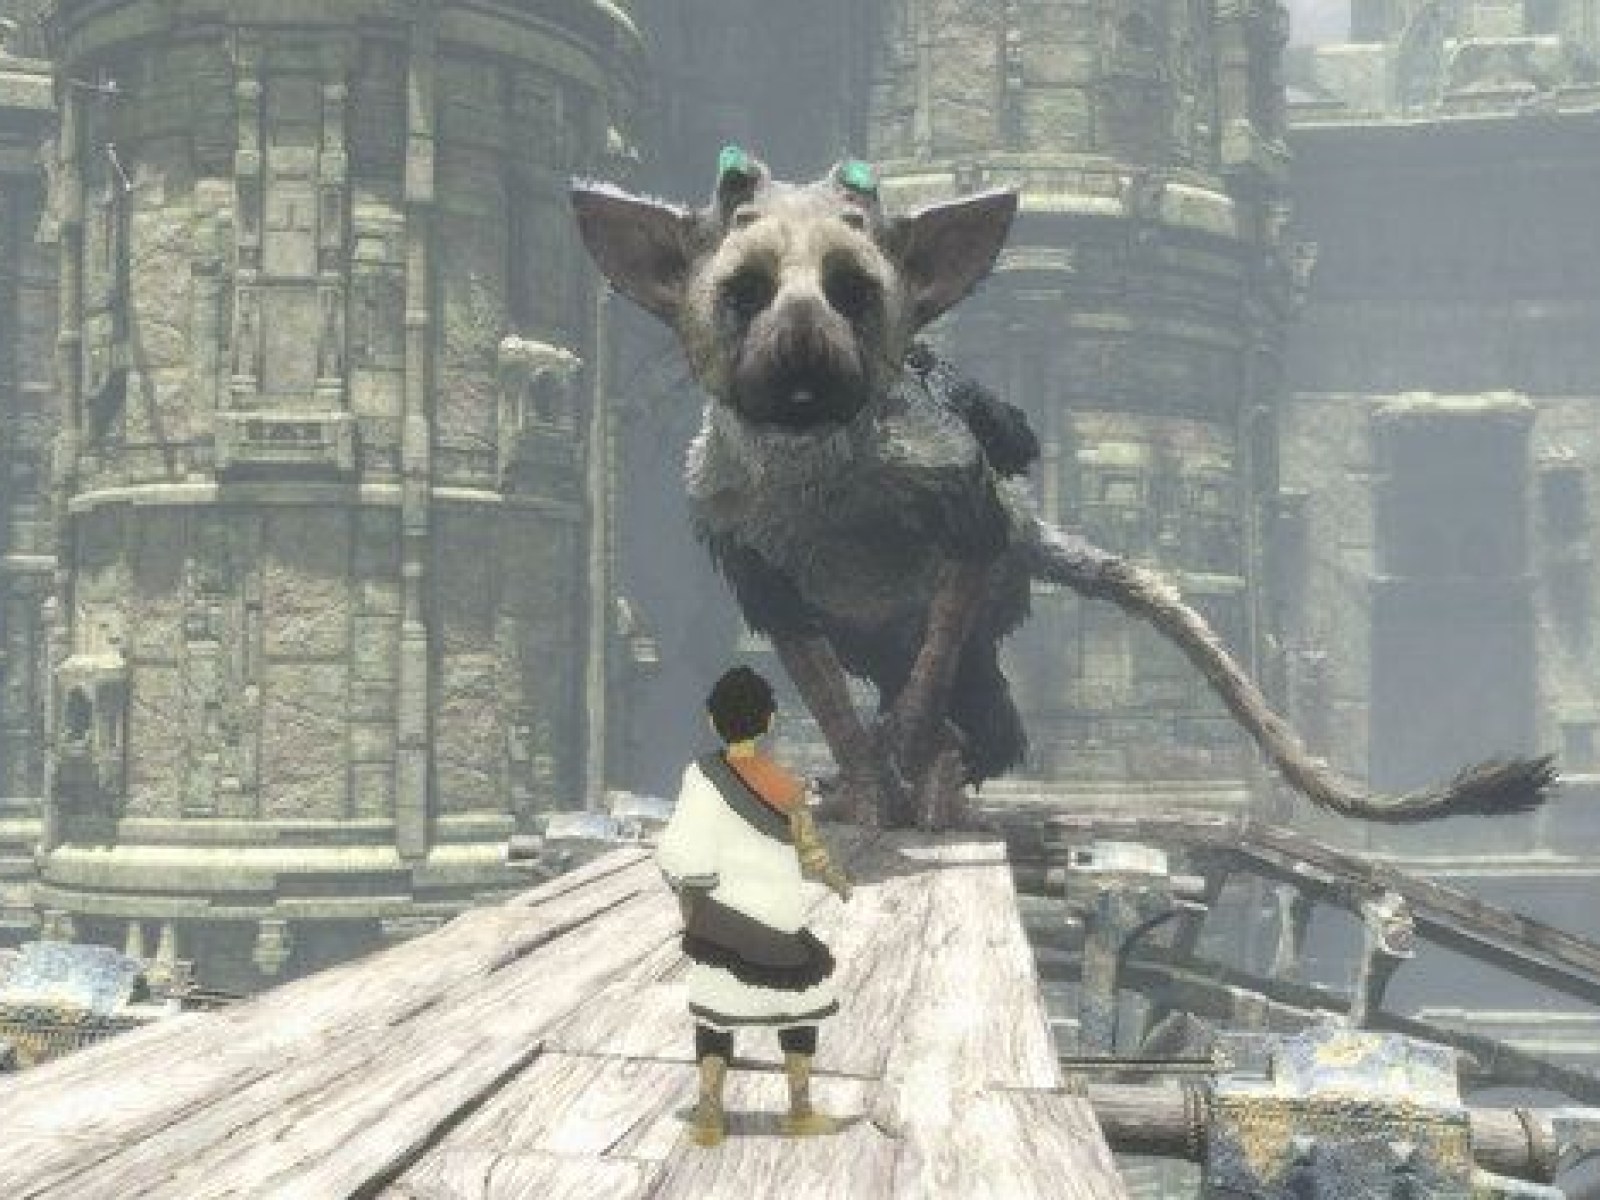 The Last Guardian' Reviews Will Come A Day Before Release